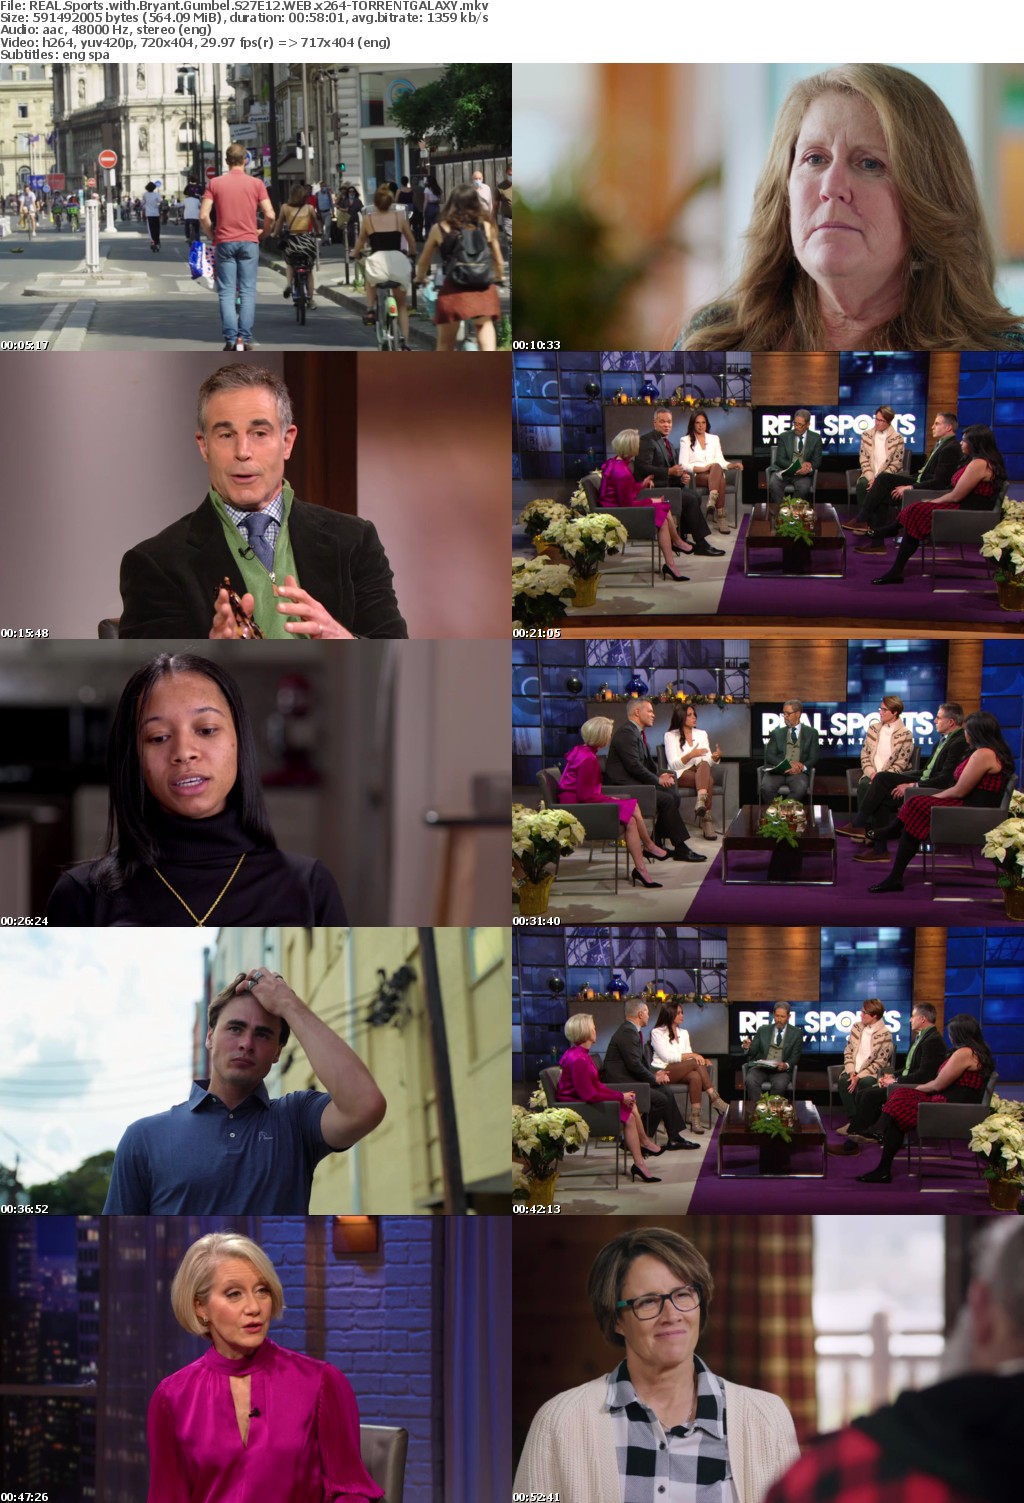 REAL Sports with Bryant Gumbel S27E12 WEB x264-GALAXY